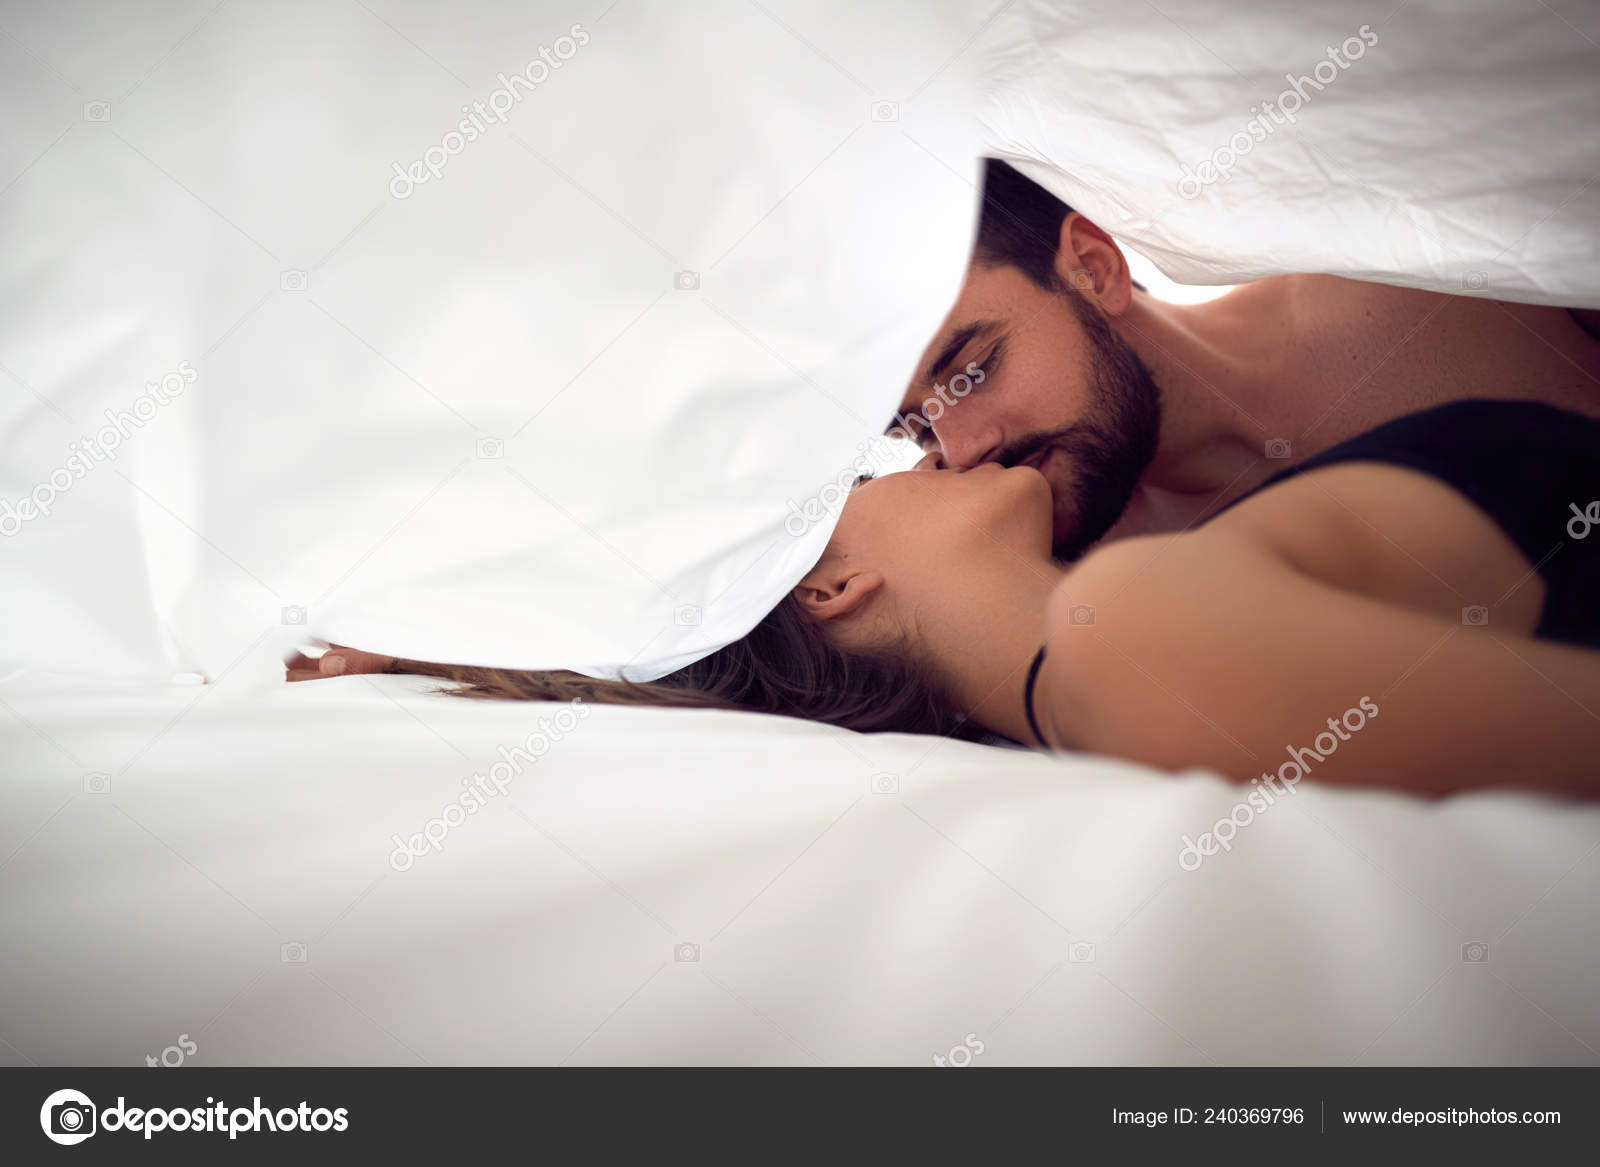 Man and woman making love images